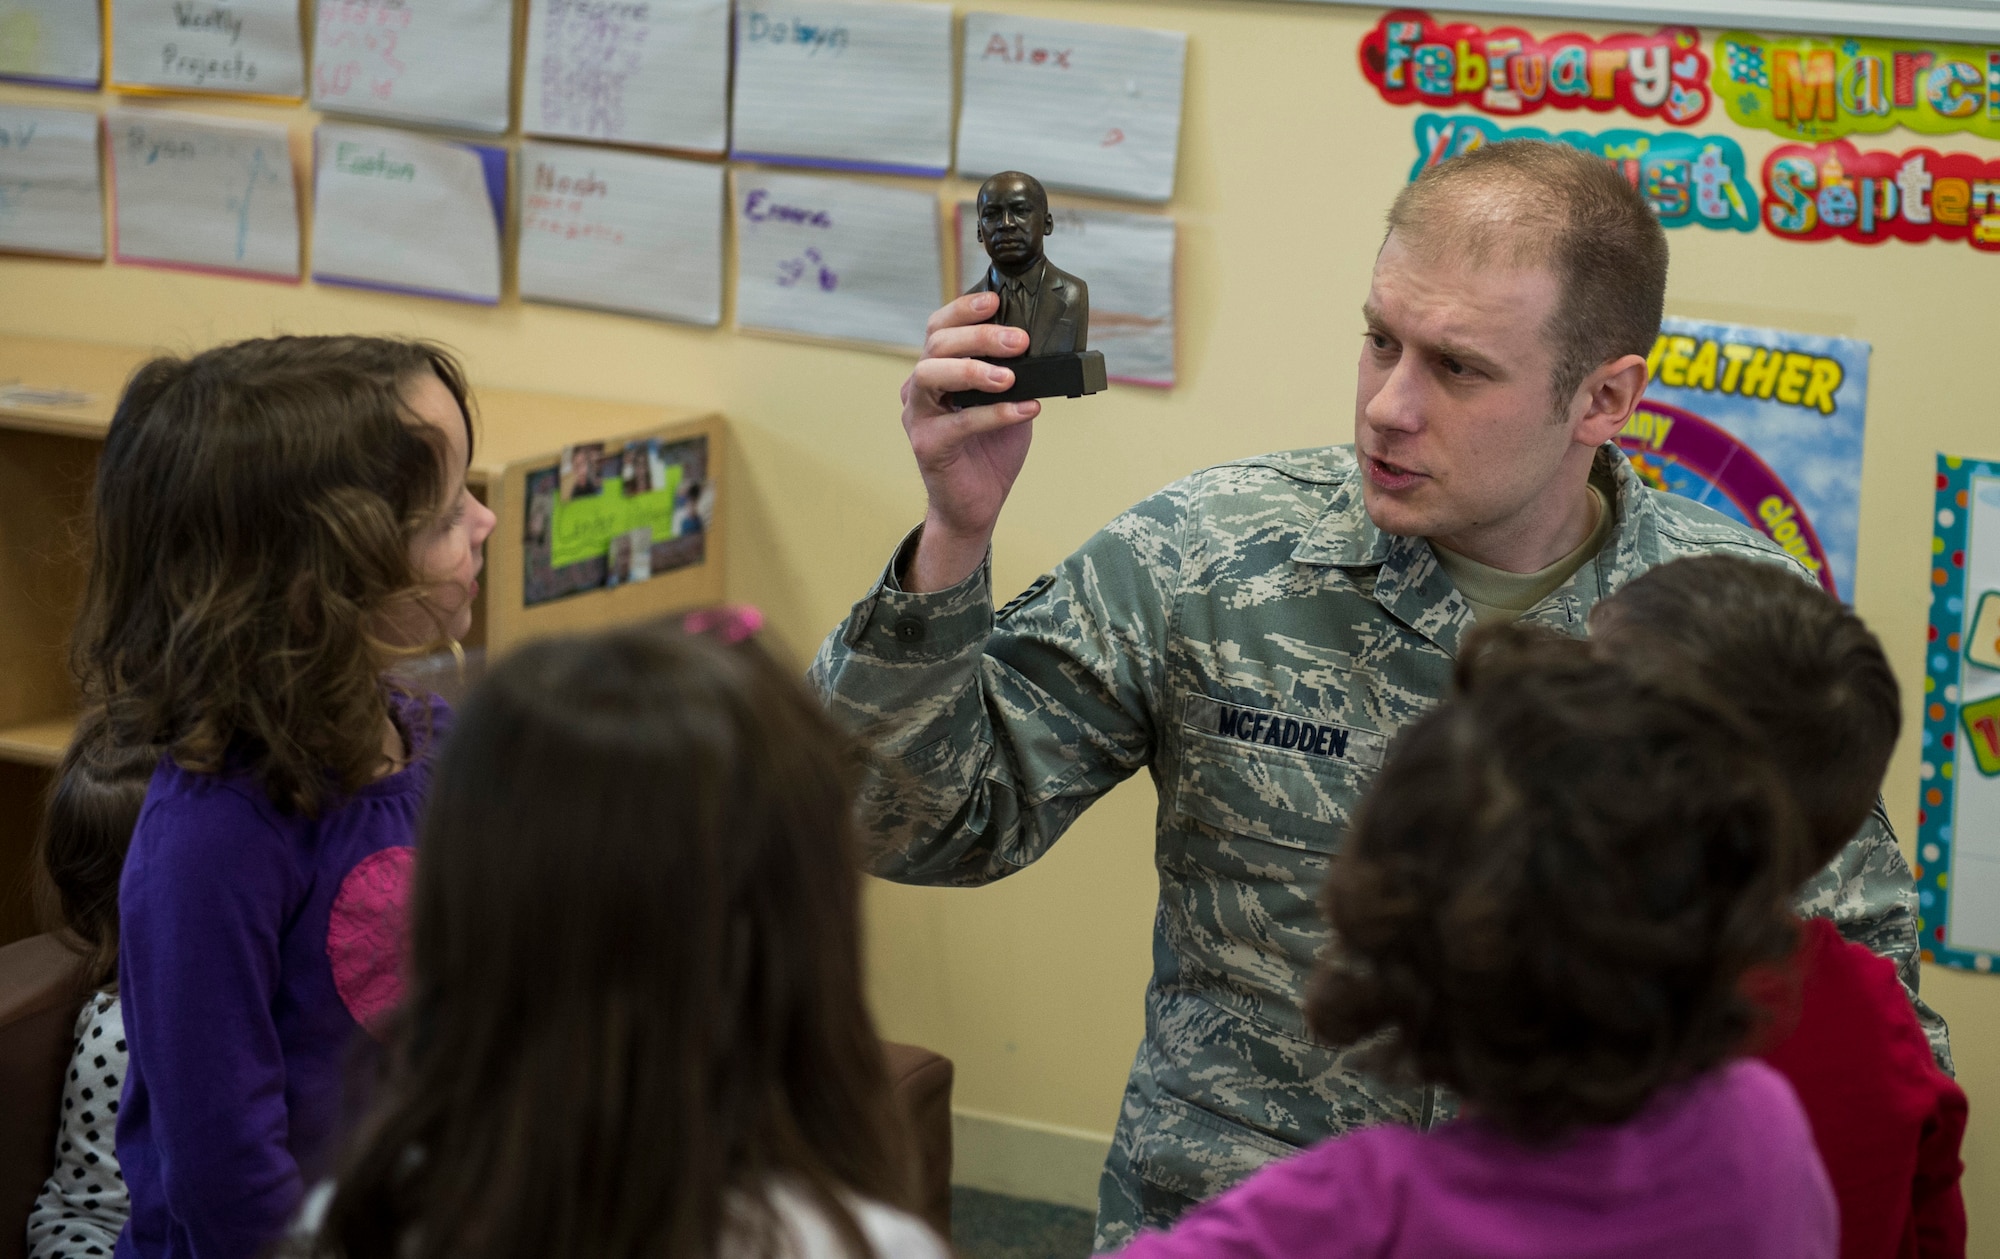 U.S. Air Force Staff Sgt. Joe McFadden, 52nd Fighter Wing Public Affairs photojournalist, displays a miniature statue of Dr. Martin Luther King Jr. to a group of children at the Child Development Center on Spangdahlem Air Base, Germany, Jan. 14, 2016. McFadden, Airmen Against Drunk Driving president, sponsored the third annual Dr. Martin Luther King Jr. ‘Reading Is A Civil Right’ reading drive to promote early literacy among children ahead of the holiday weekend. (U.S. Air Force photo by Airman 1st Class Luke Kitterman/Released) 